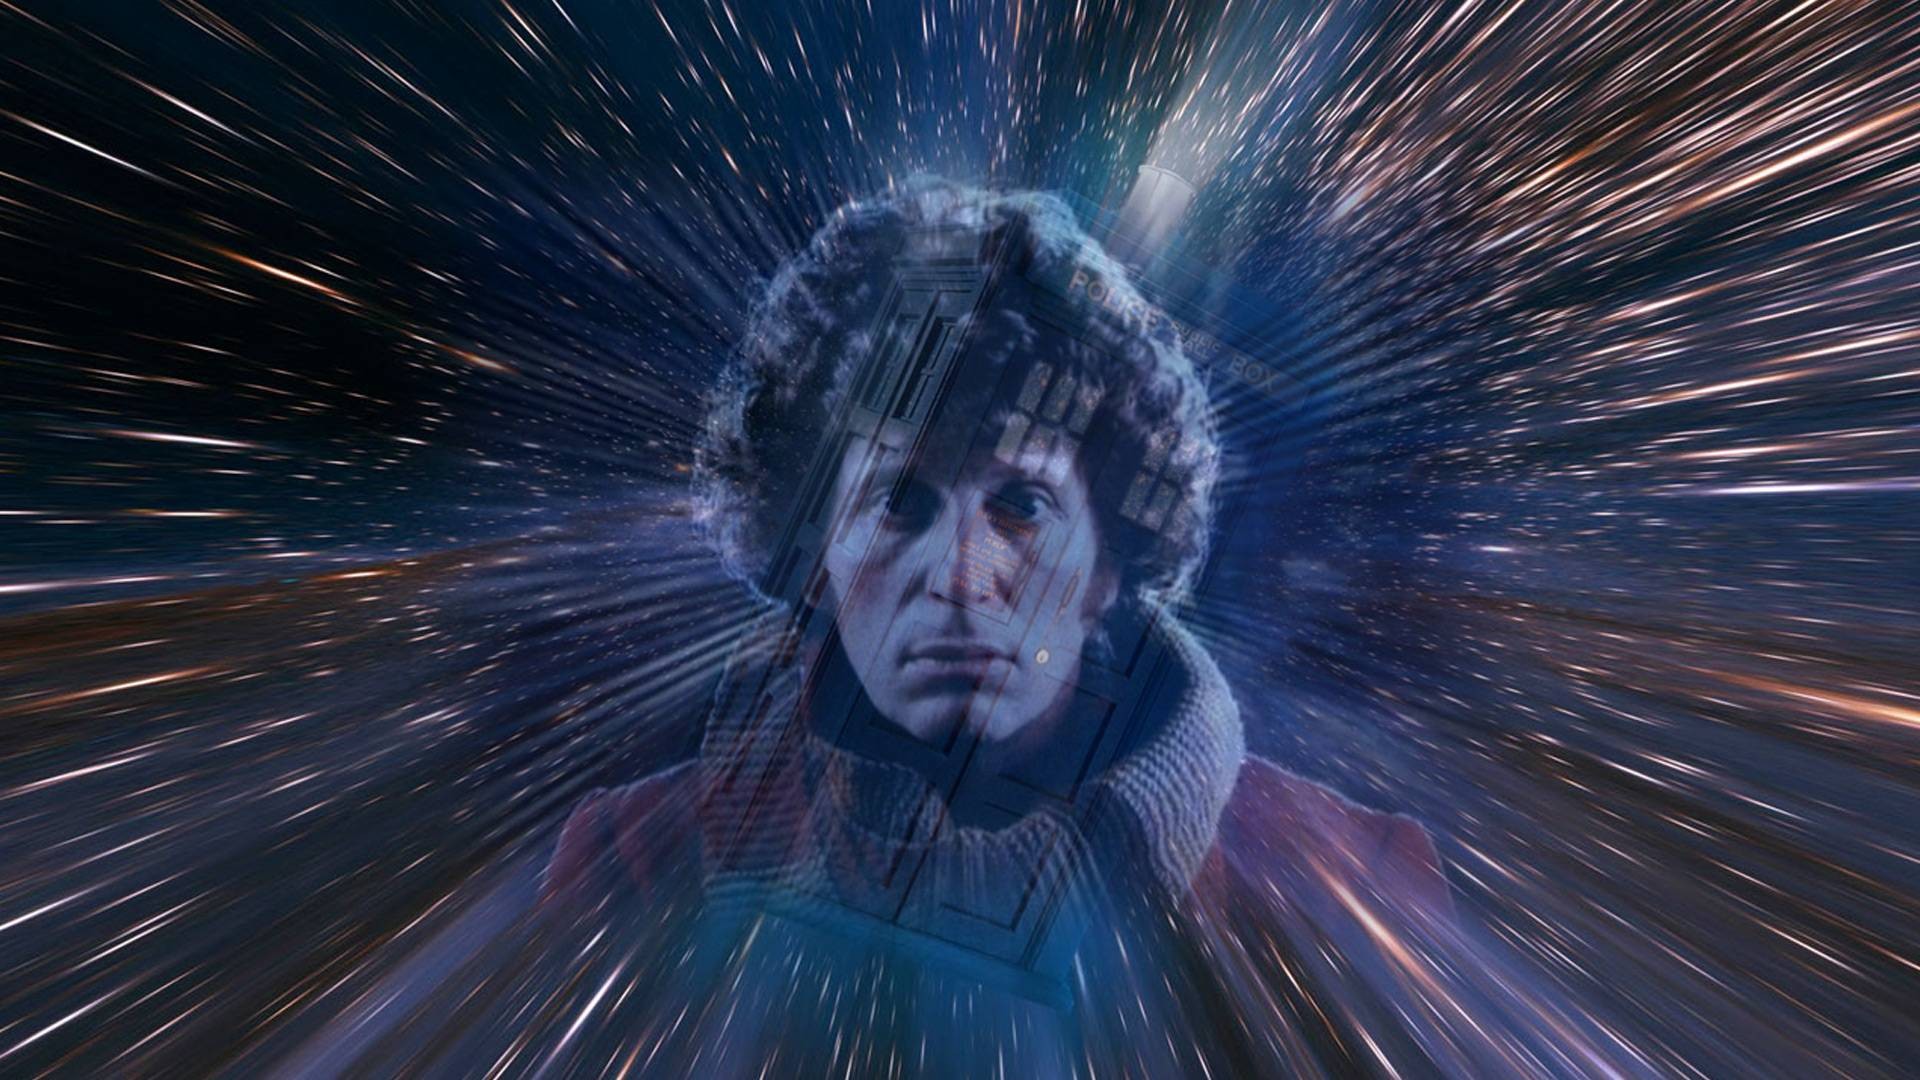 General 1920x1080 Doctor Who The Doctor TARDIS Tom Baker space science fiction TV series digital art